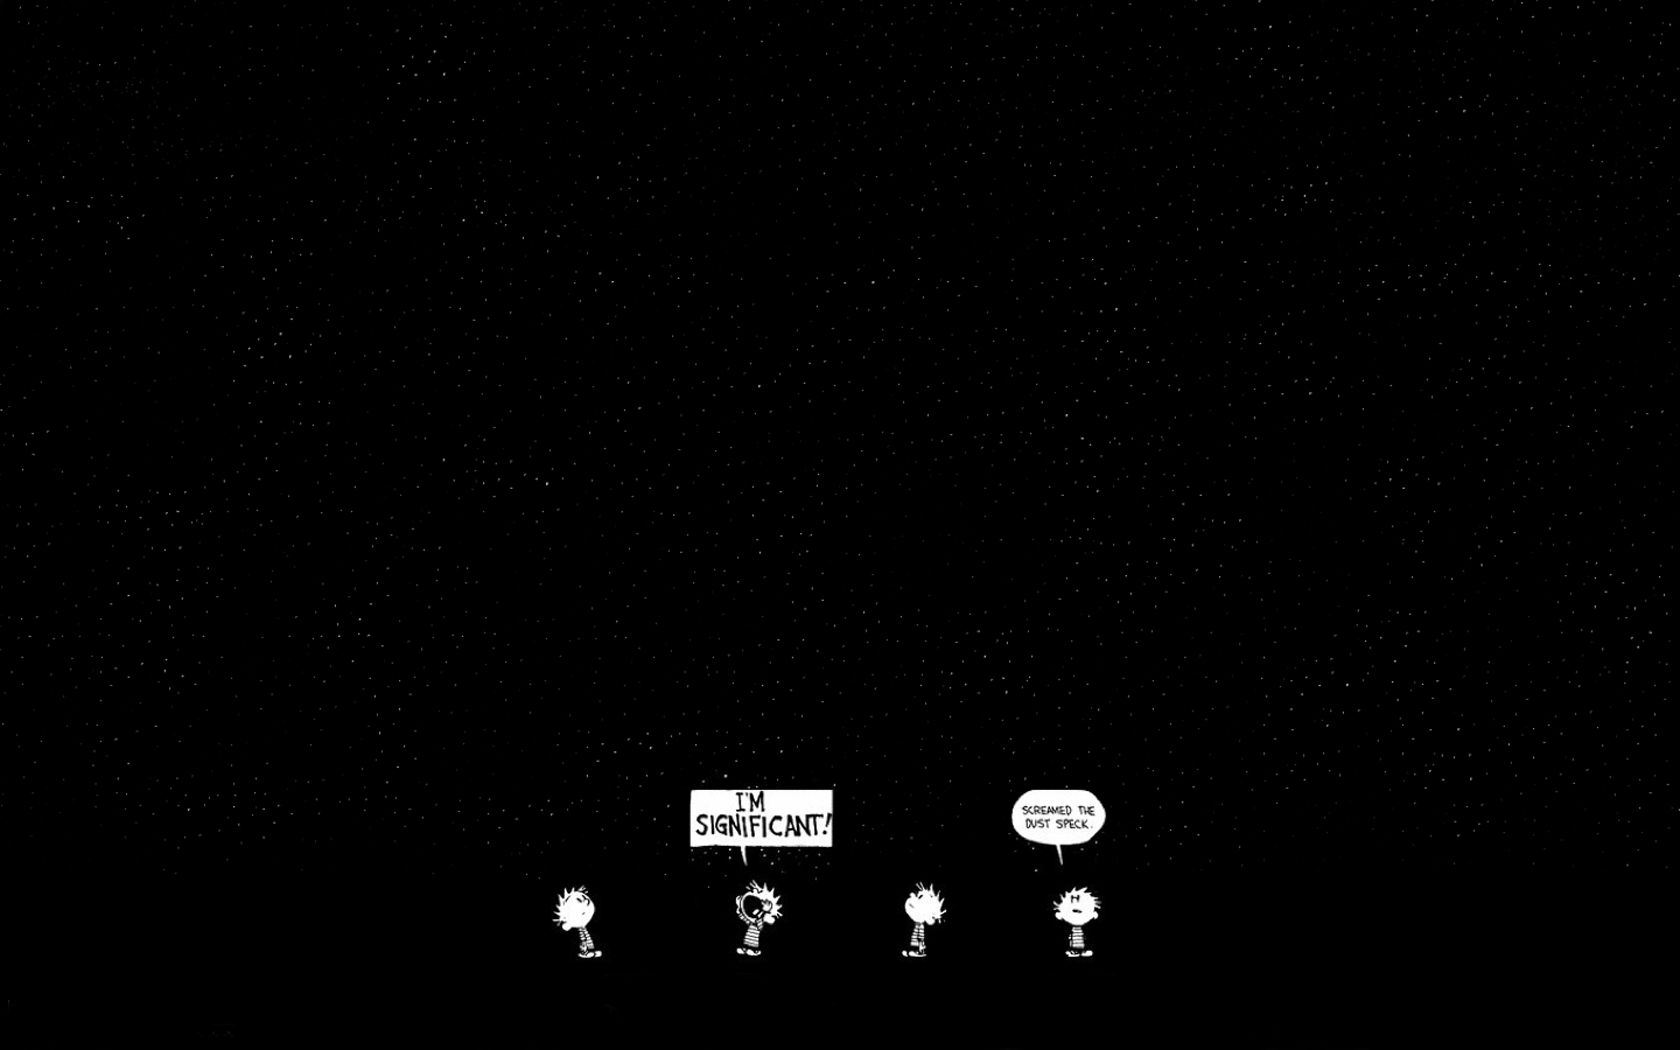 Calvin and Hobbes intelligent life